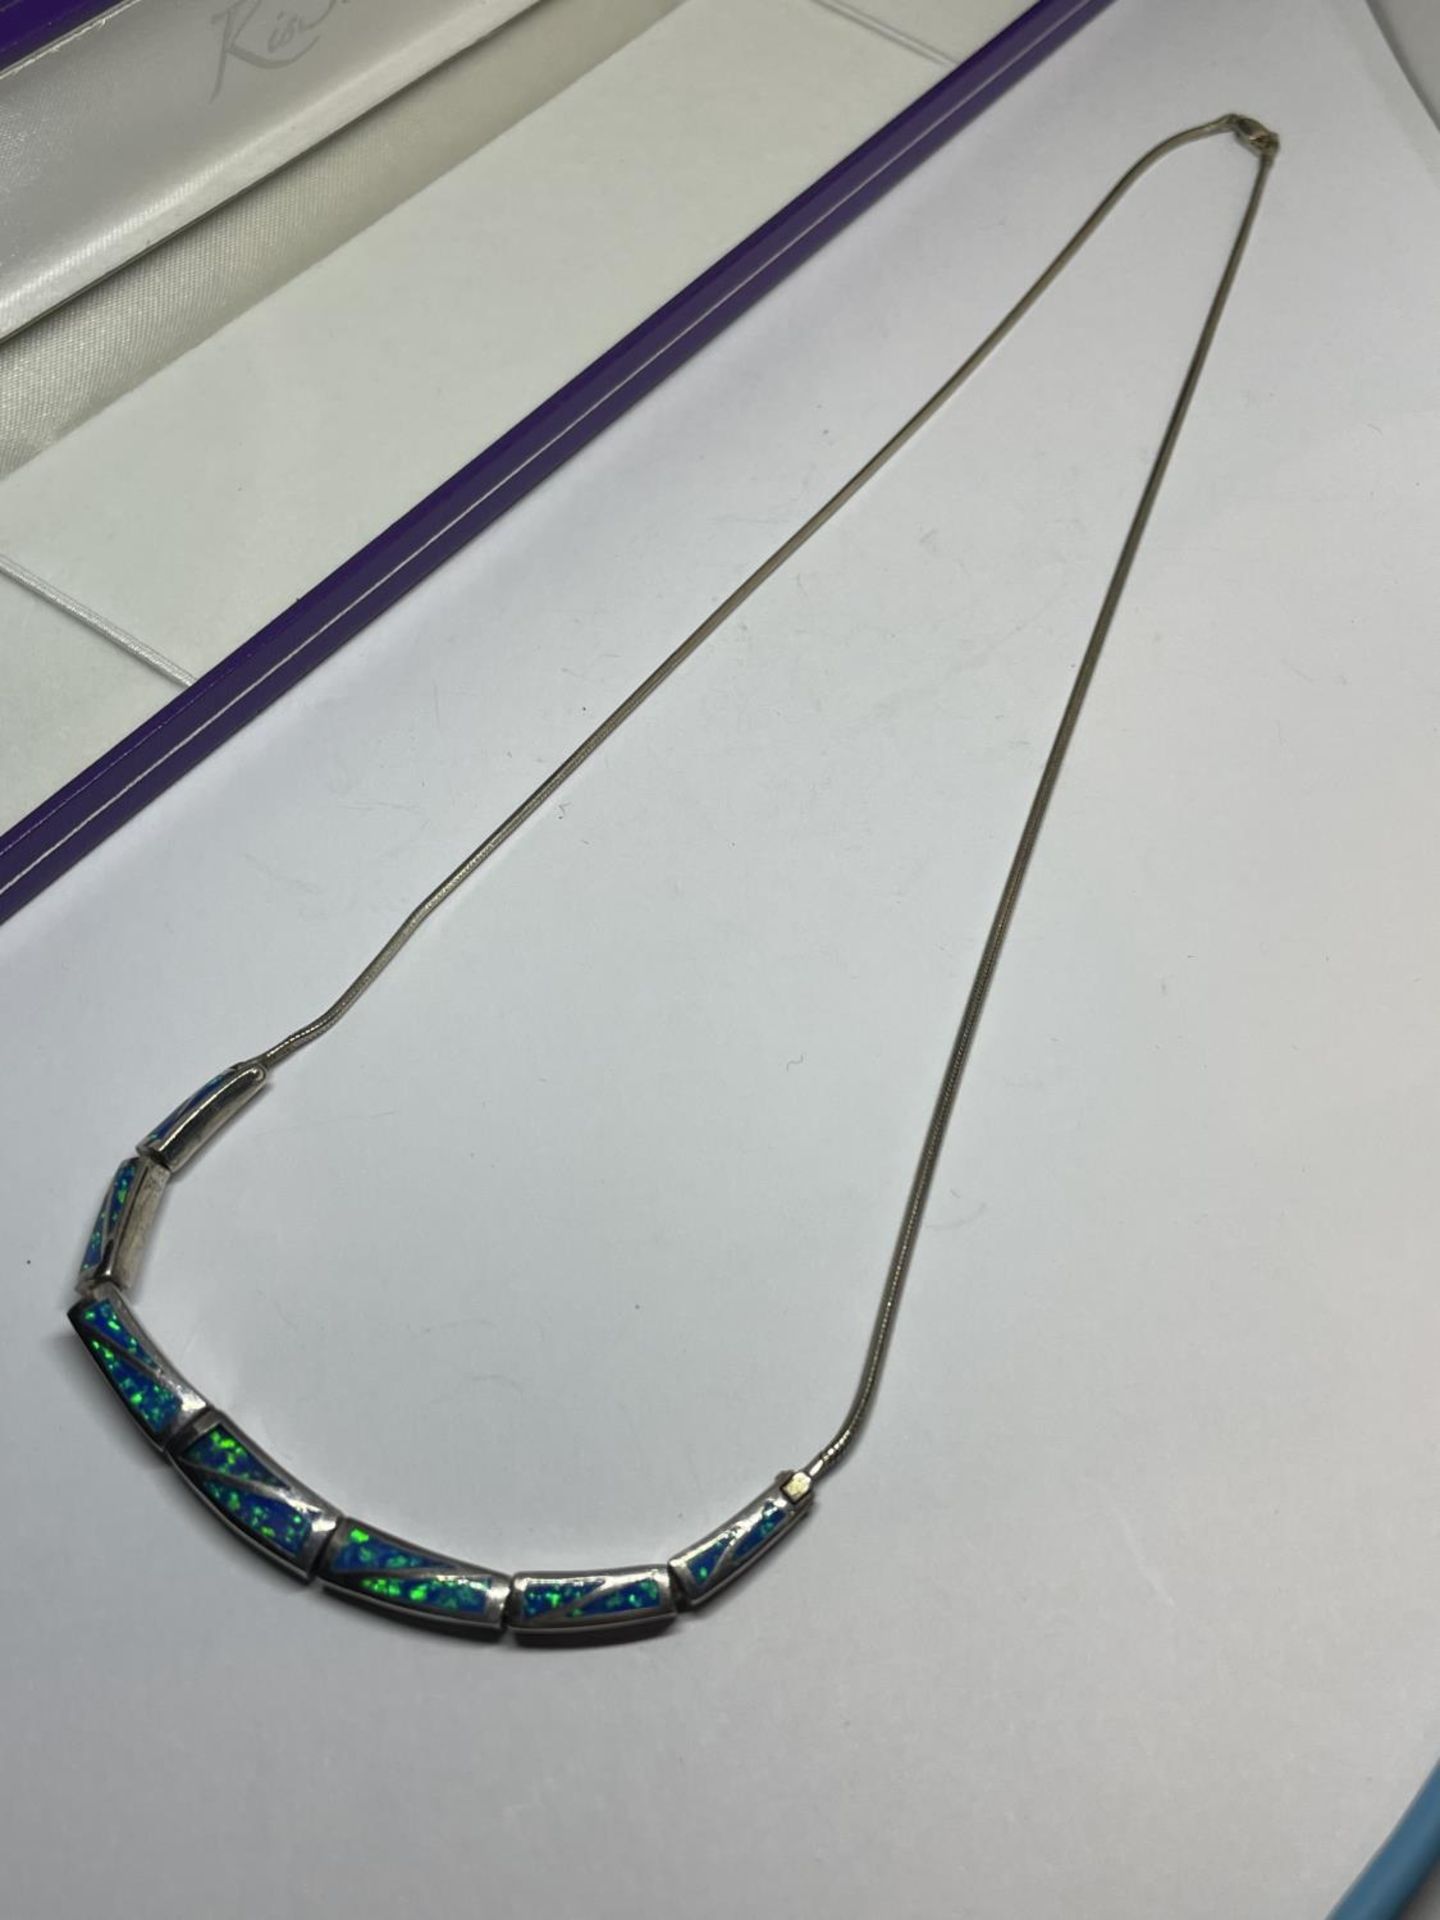 A MARKED SILVER AND MALACHITE NECKLACE IN A PRESENTATION BOX